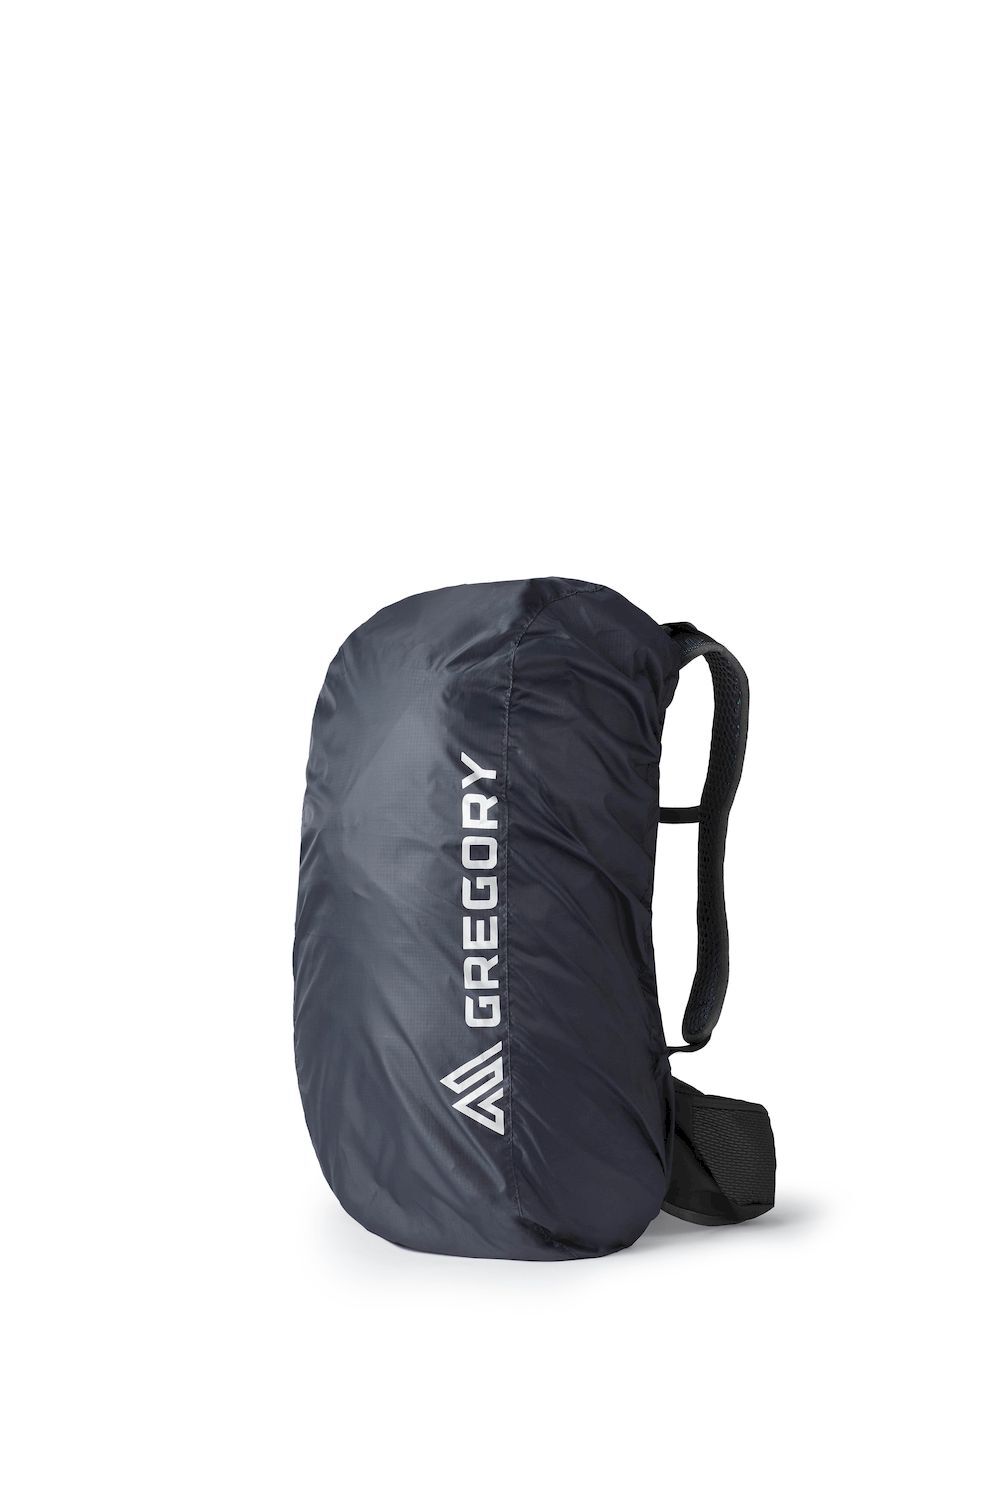 Gregory Raincover 30L - Protection pluie sac à dos | Hardloop